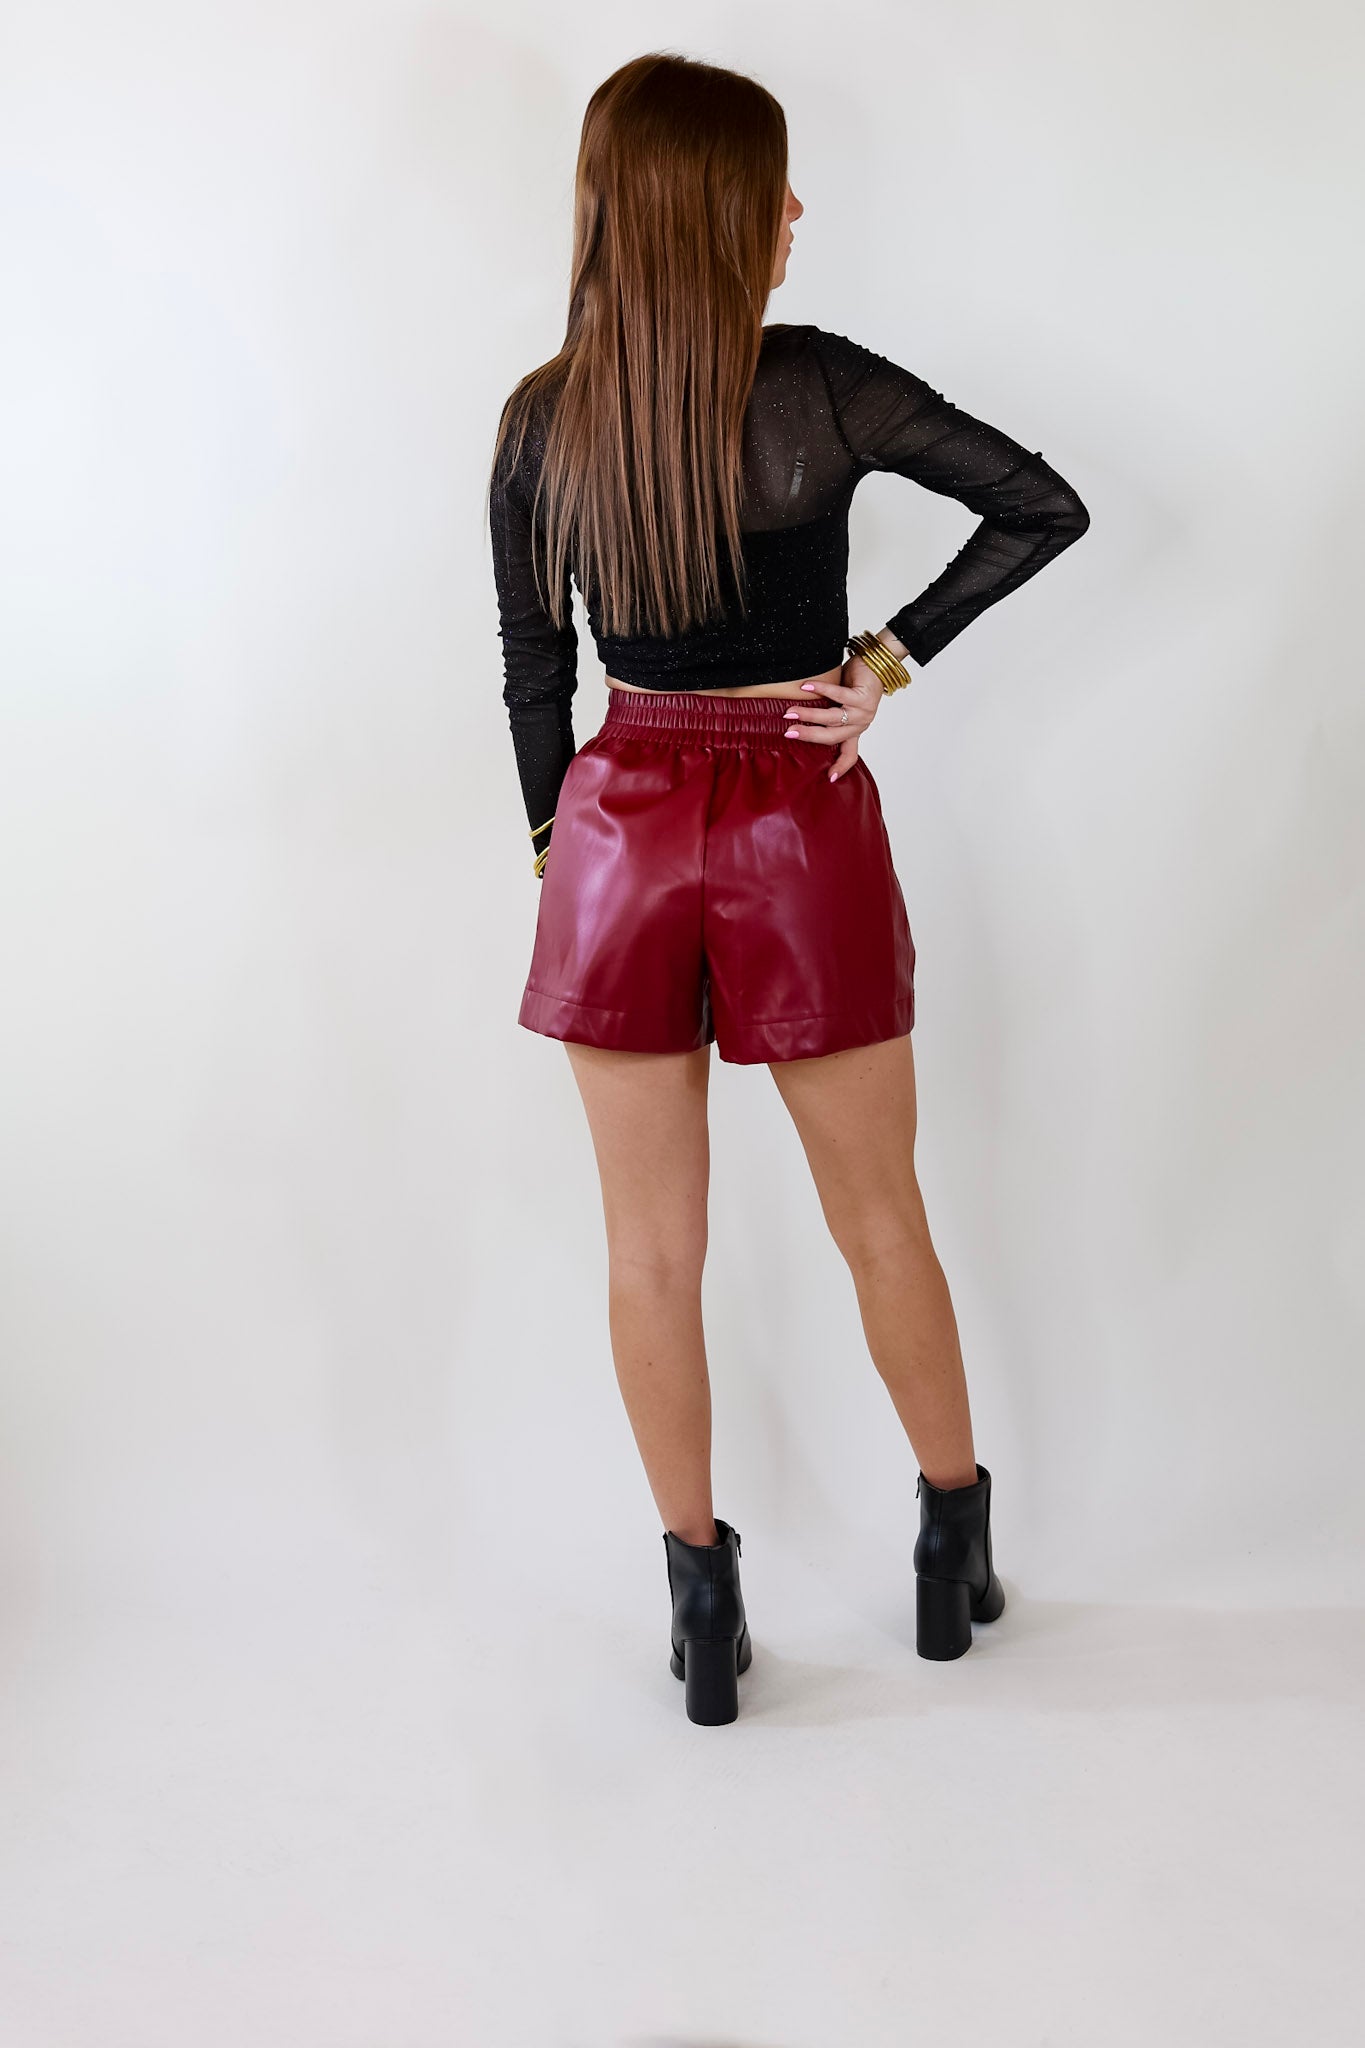 Lucky Timing Shimmery Long Sleeve Crop Top in Black - Giddy Up Glamour Boutique